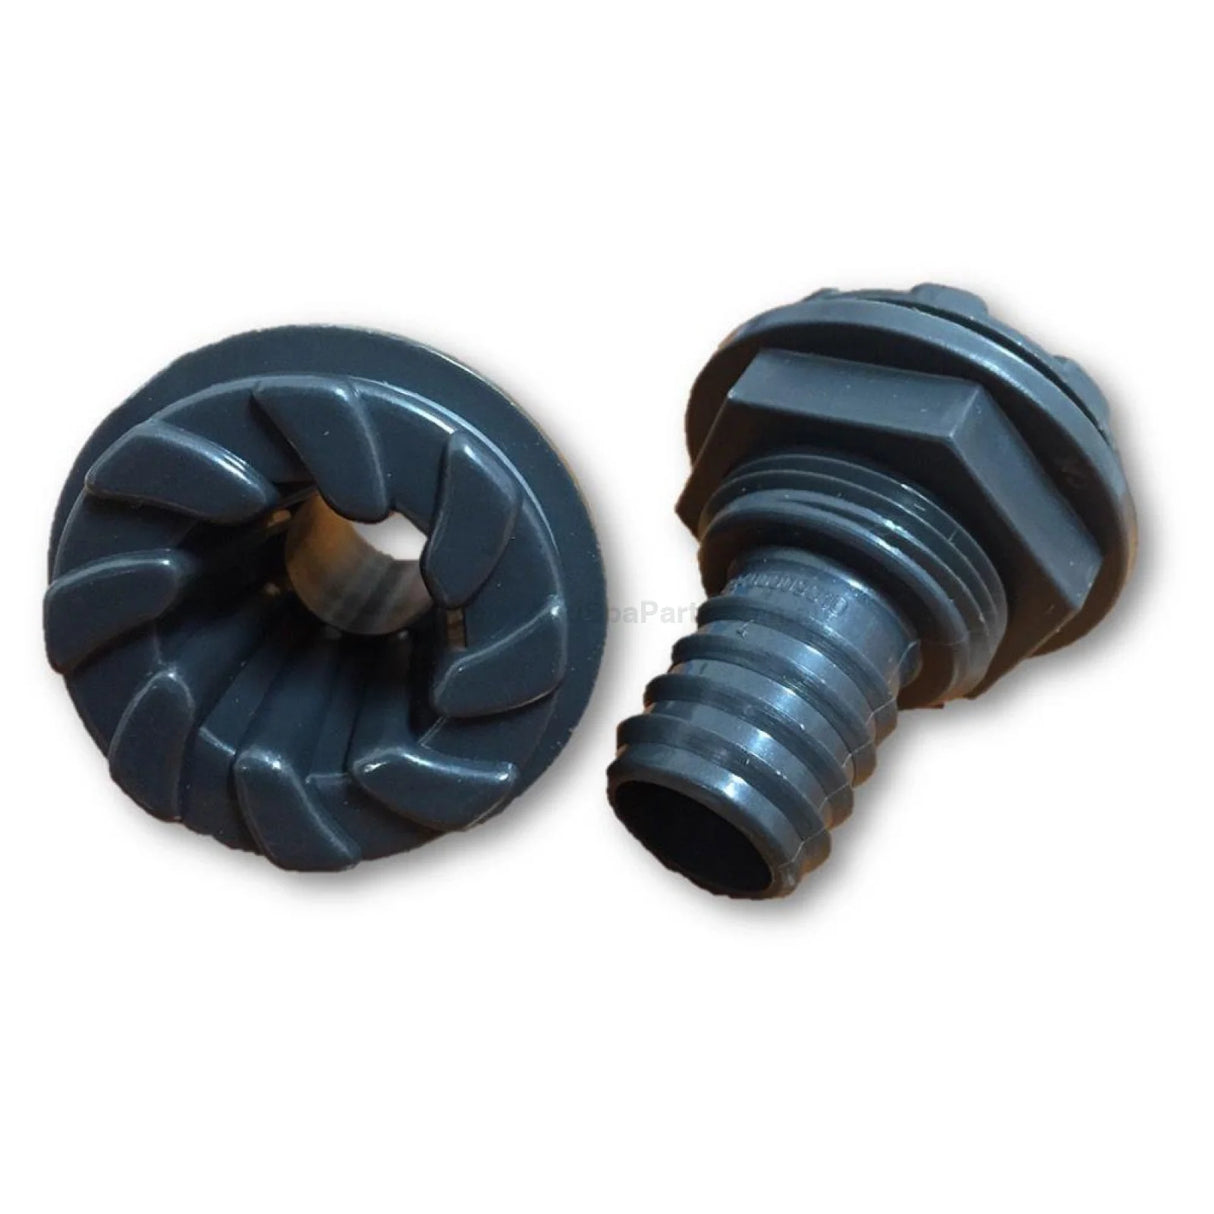 CMP Ozone / Heater Return Jet Fitting - Signature Spa Industries Sapphre - Heater and Spa Parts